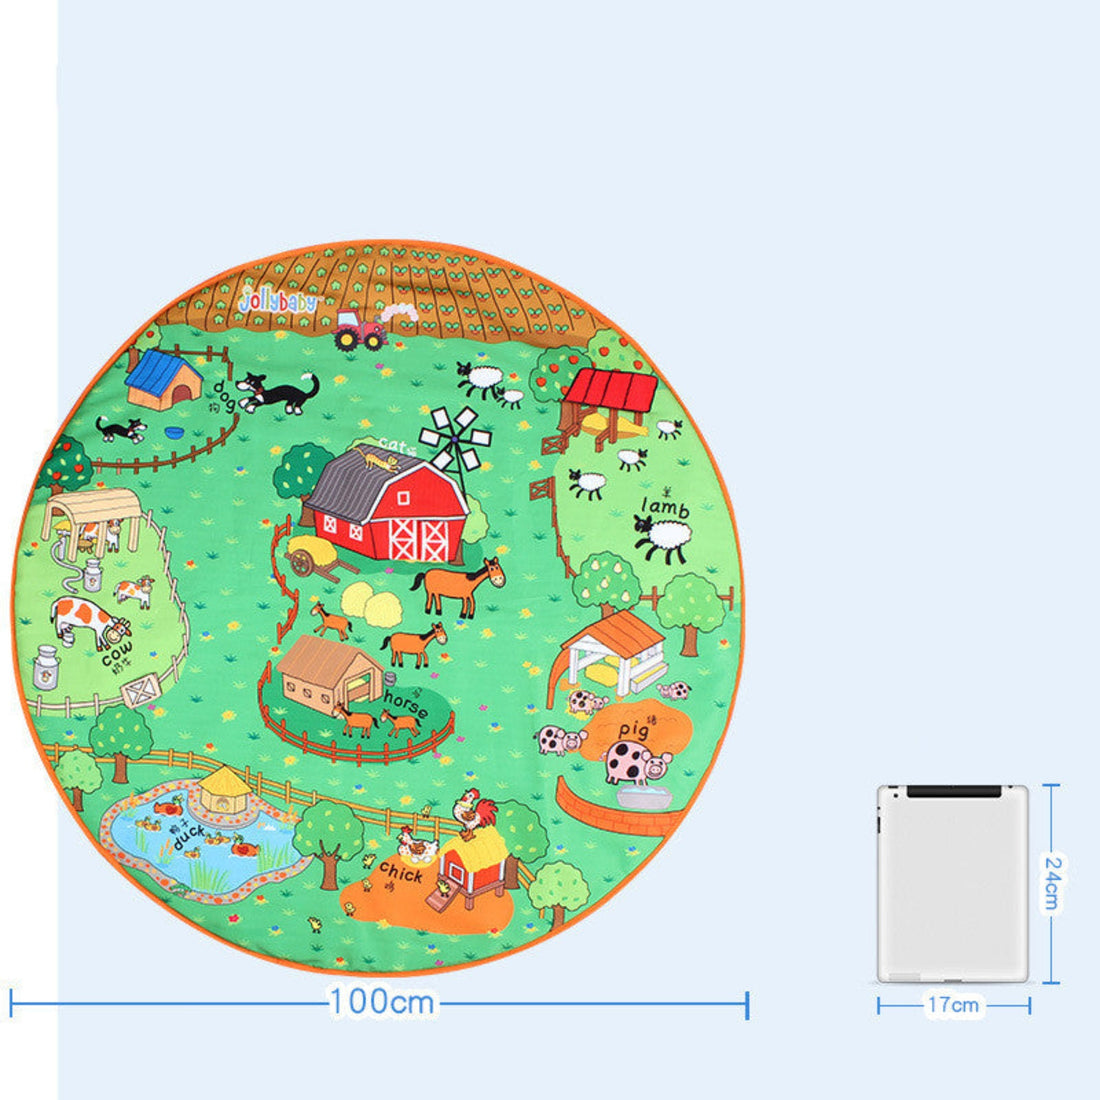 Early education play blanket with various textures